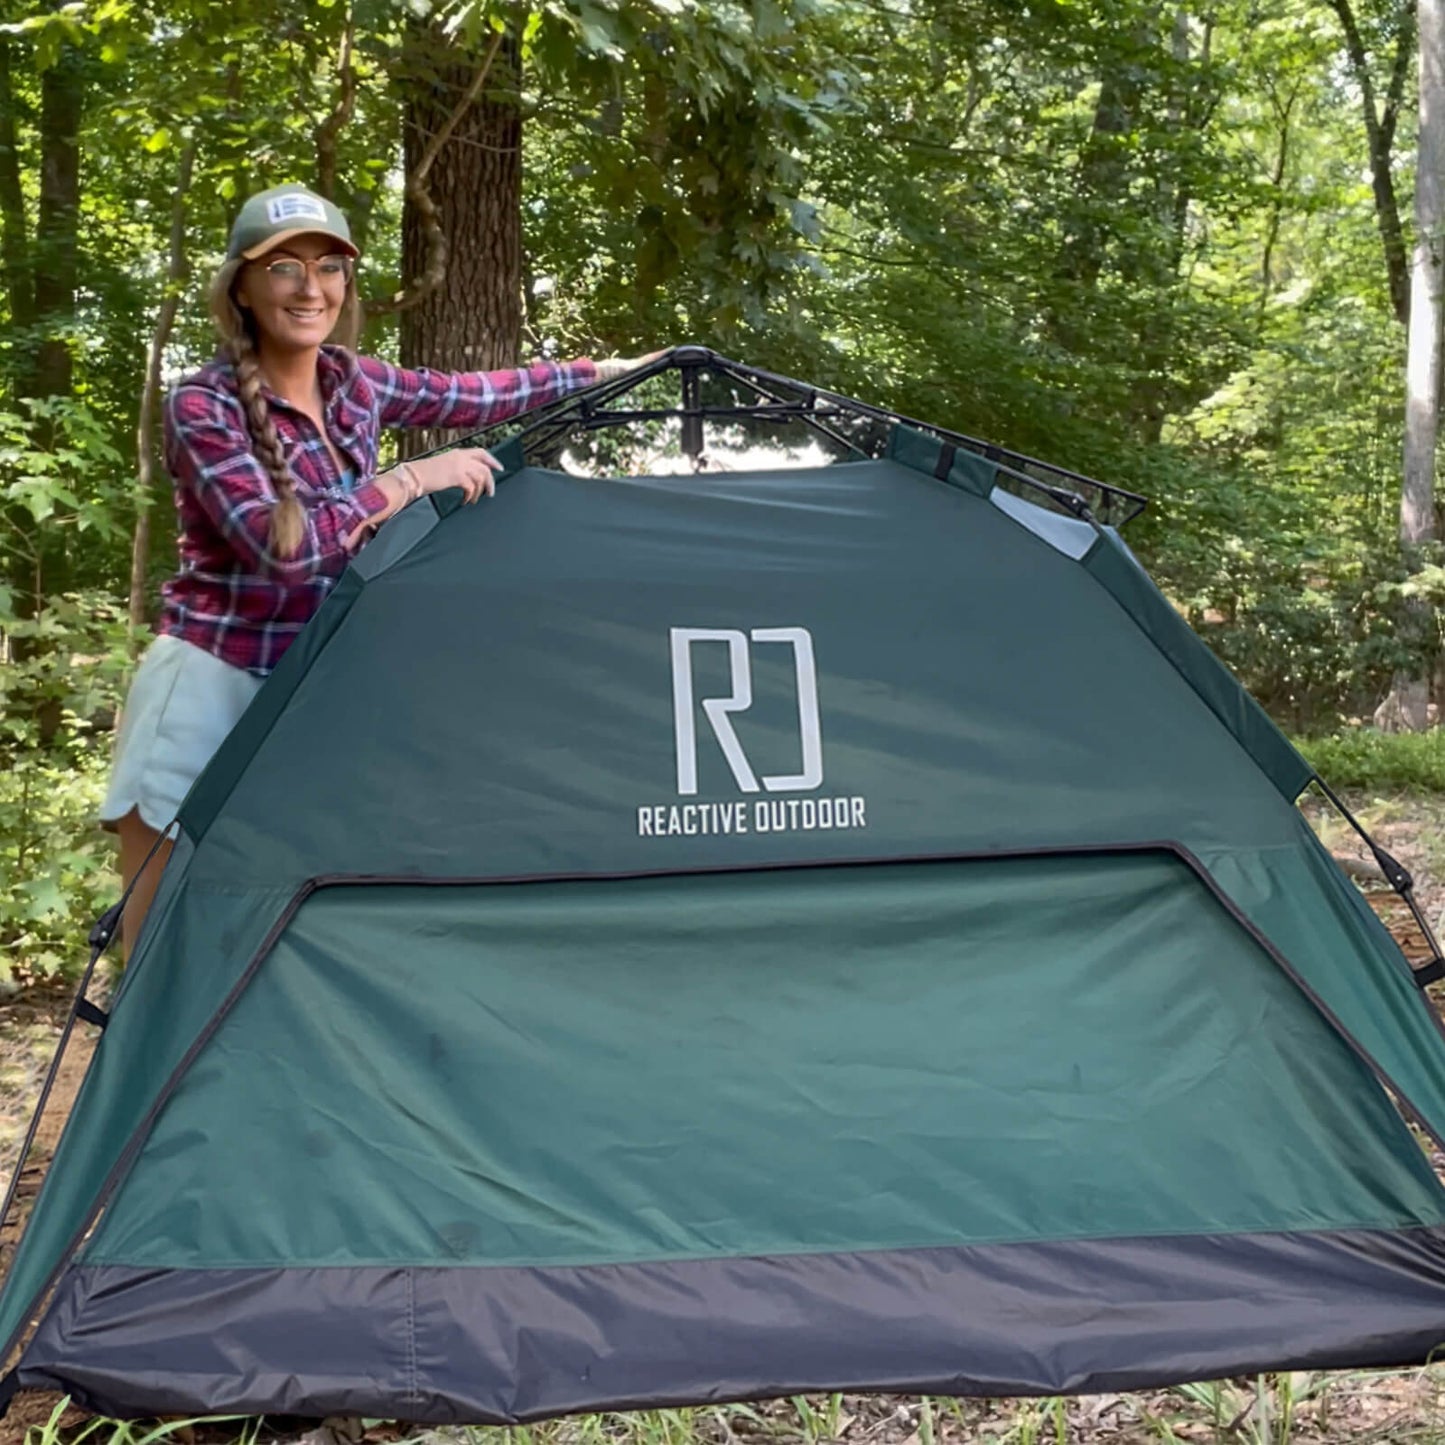 1 Small-Sized + 1 Large-Sized 3Secs Tent (Family Package, US) + Free Camping Checklist